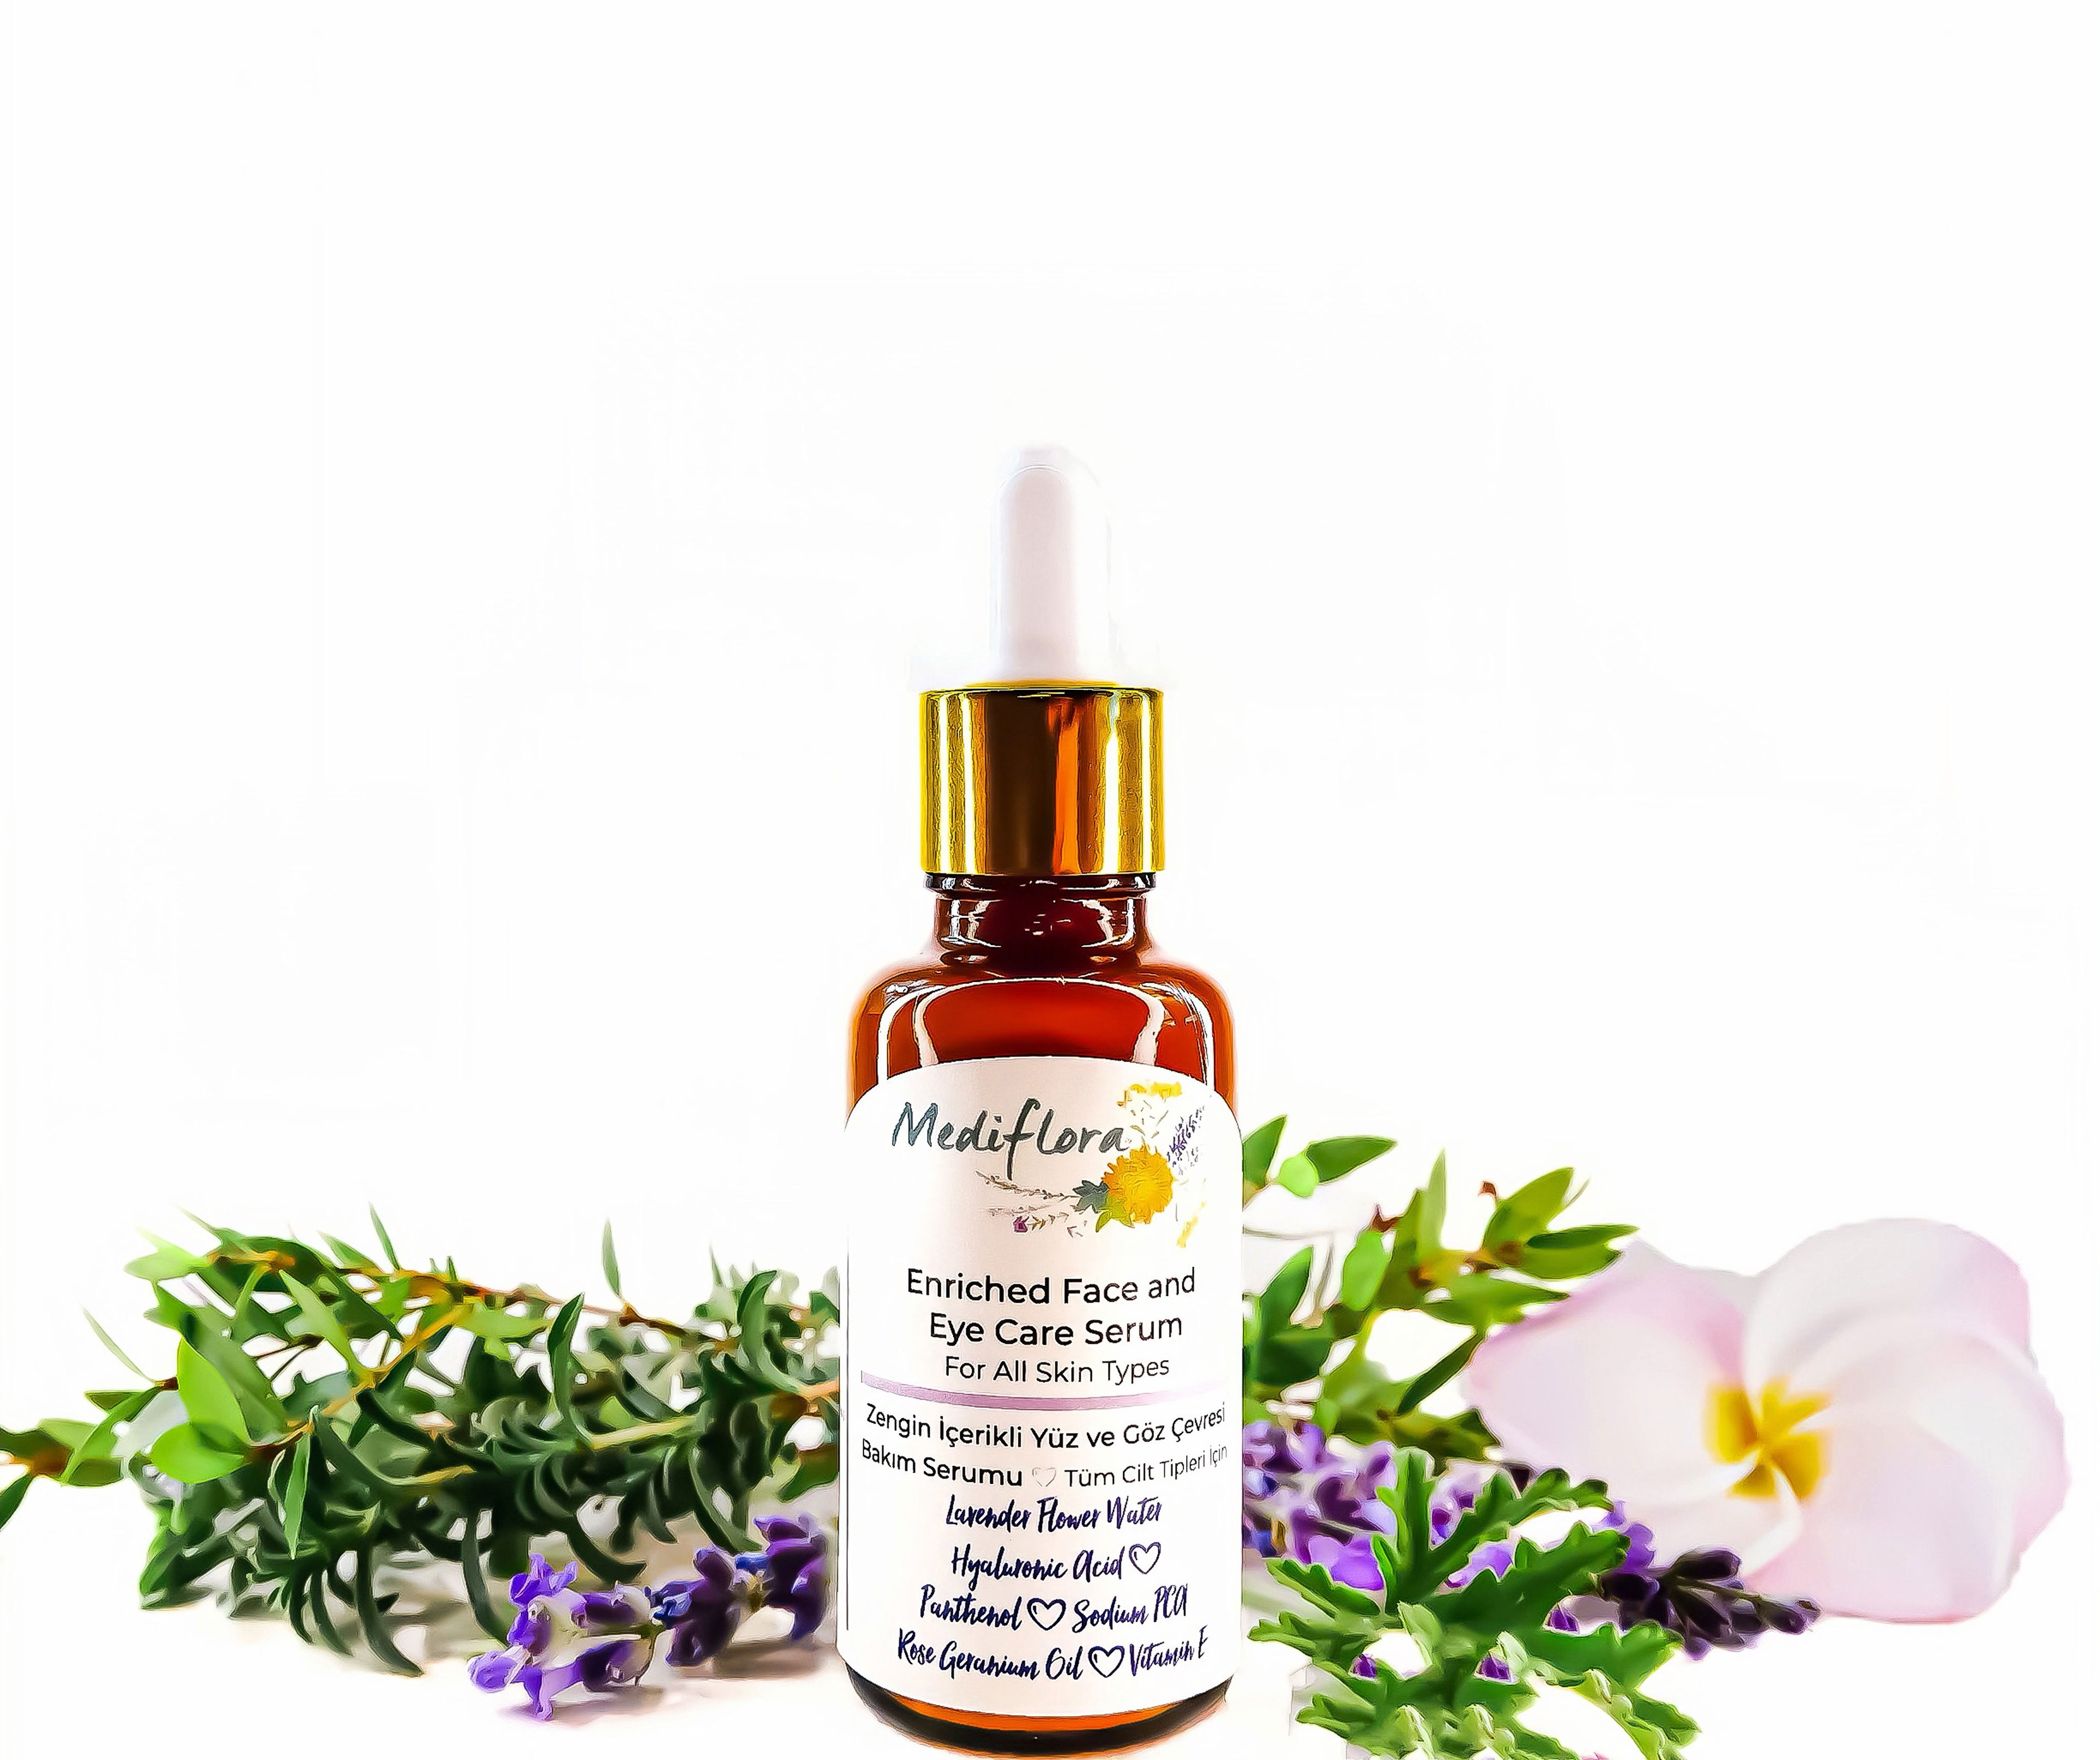 Enriched Face and Eye Care Serum